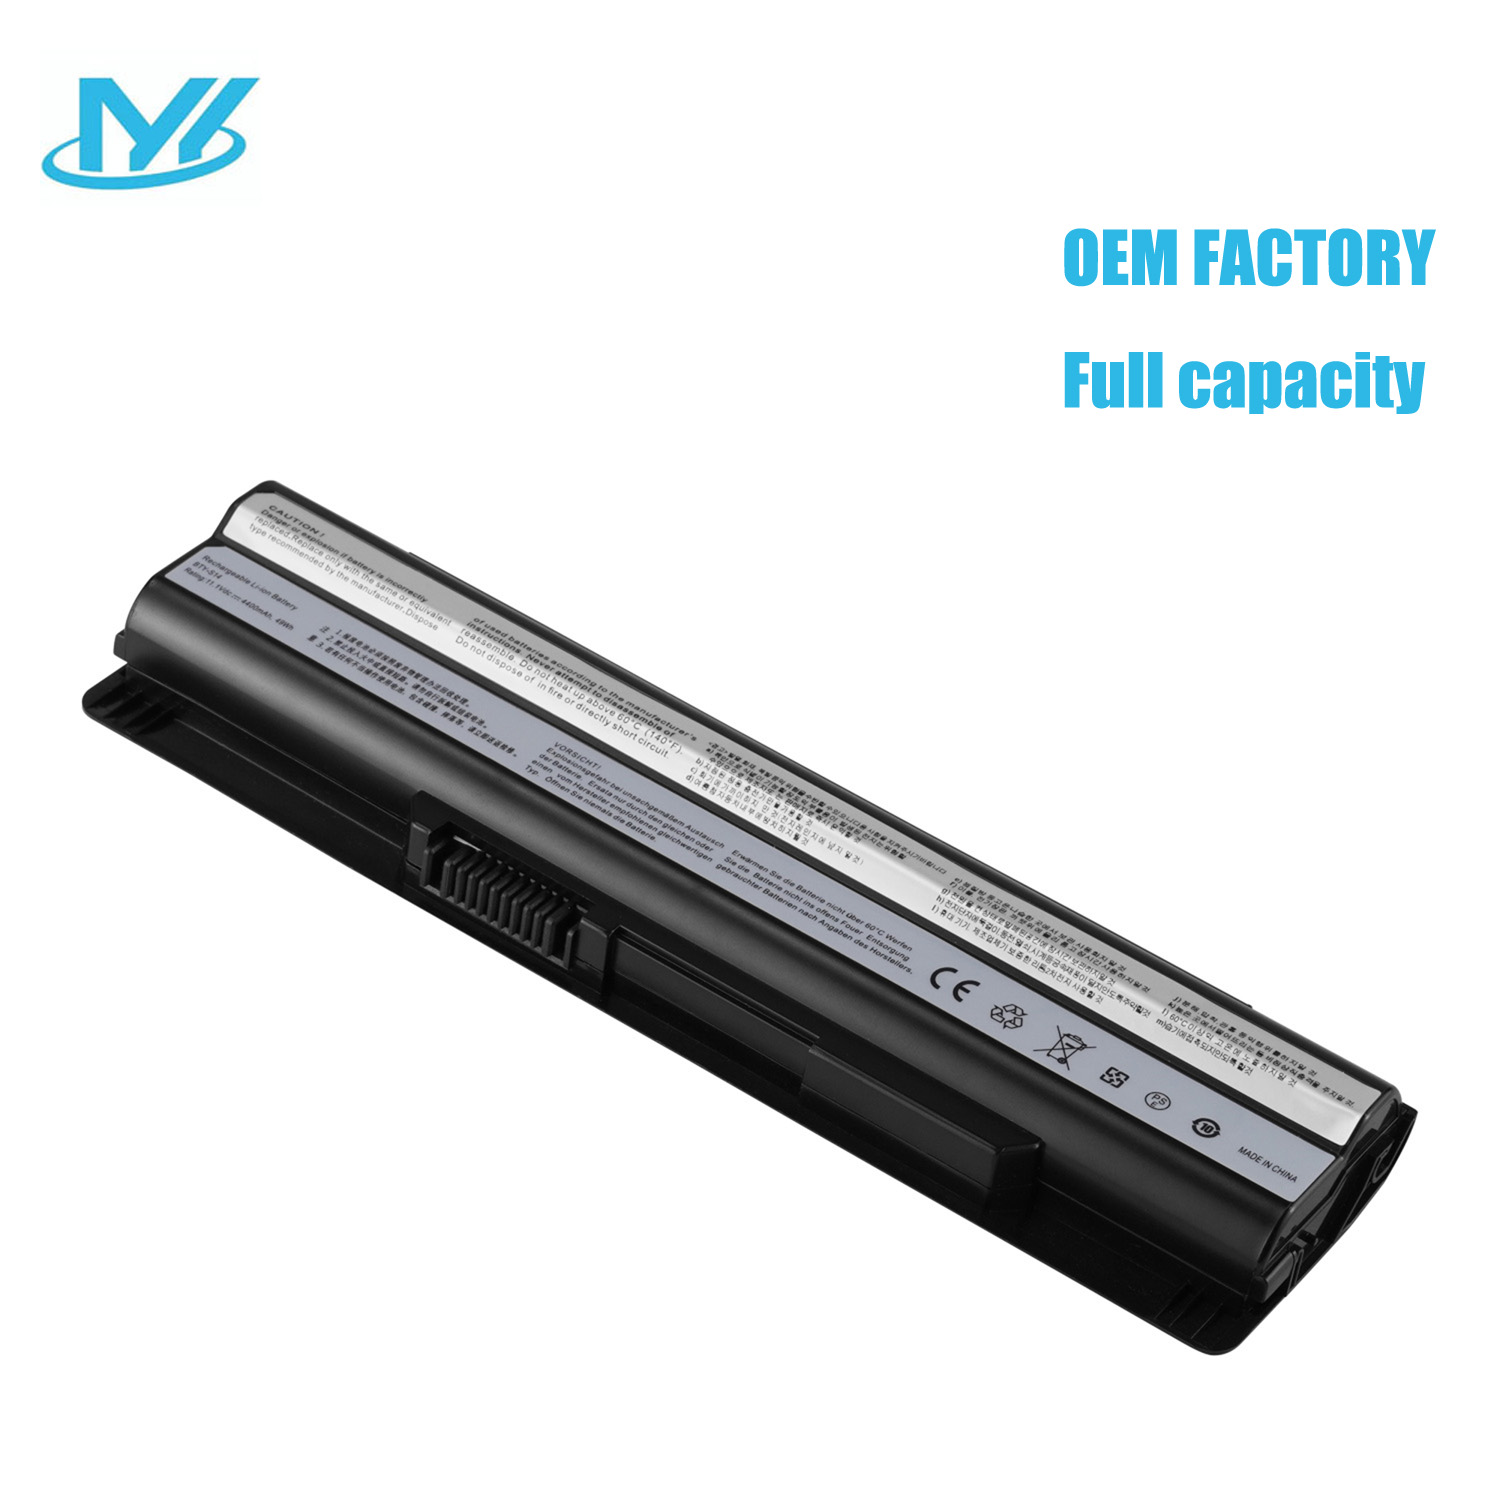 BTY-S14 rechargeable lithium ion Notebook battery Laptop batteryA31-D15 A32-D15 A41-D15 A42-D15 15.12V 2950mAh 44Wh